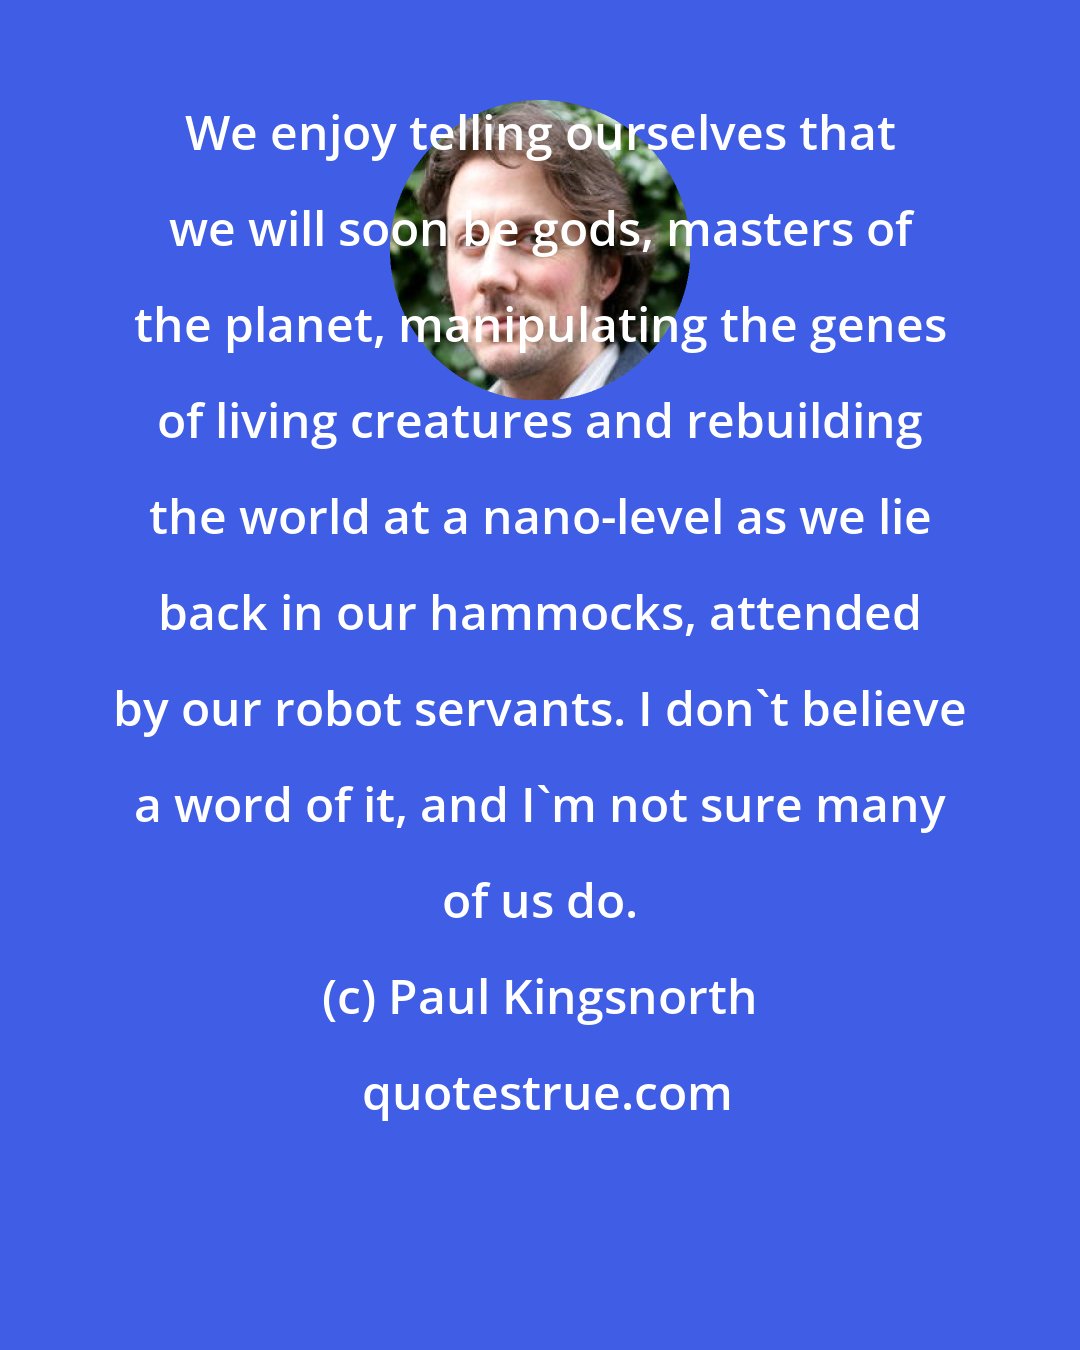 Paul Kingsnorth: We enjoy telling ourselves that we will soon be gods, masters of the planet, manipulating the genes of living creatures and rebuilding the world at a nano-level as we lie back in our hammocks, attended by our robot servants. I don't believe a word of it, and I'm not sure many of us do.